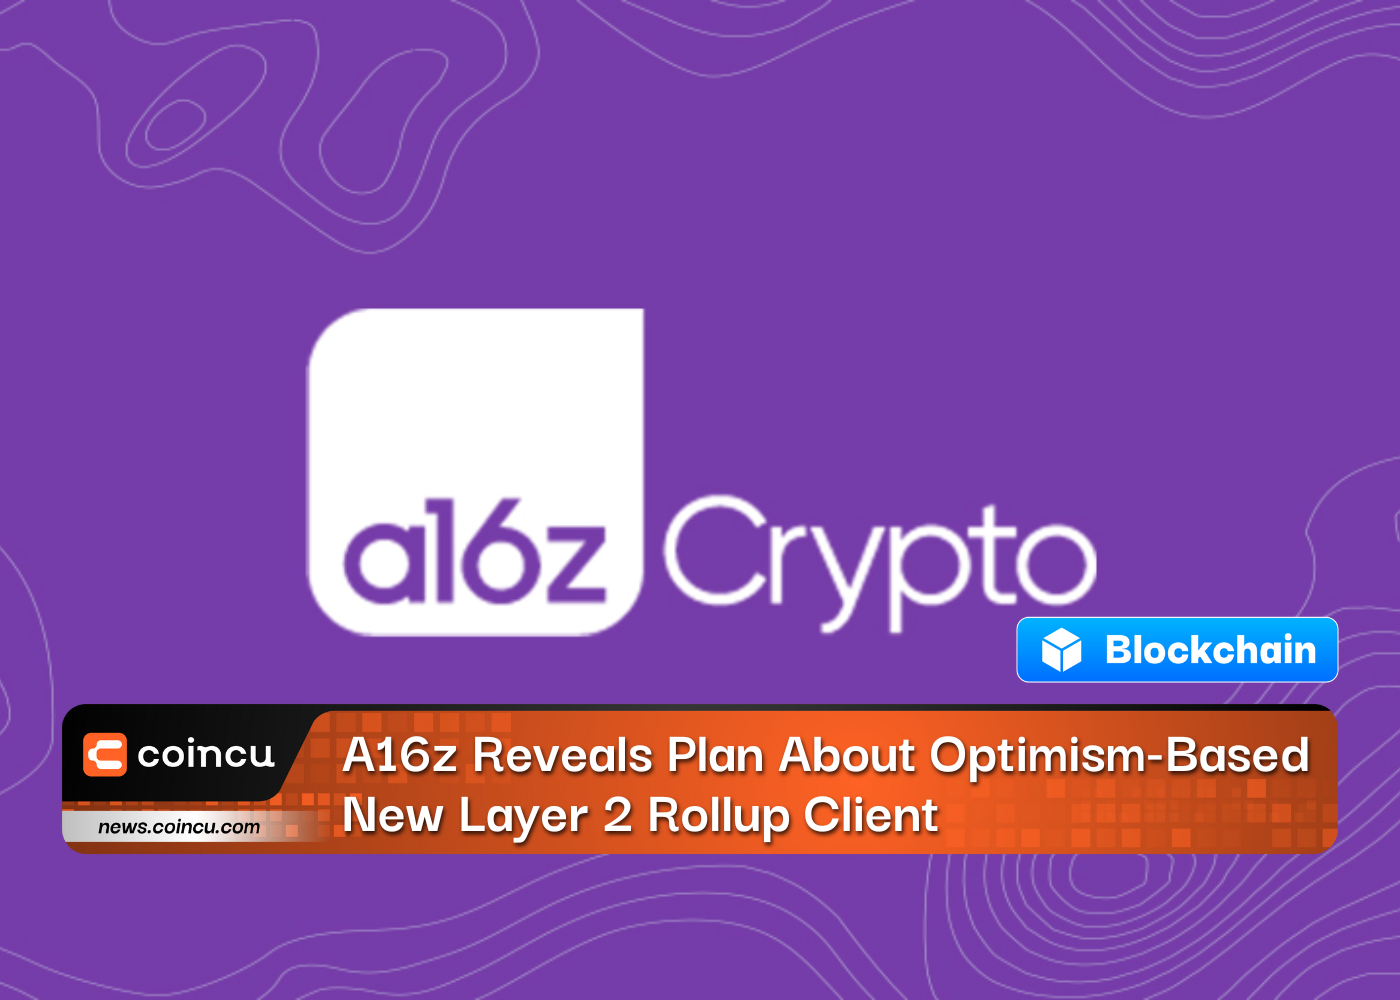 A16z Reveals Plan About Optimism-Based New Layer 2 Rollup Client